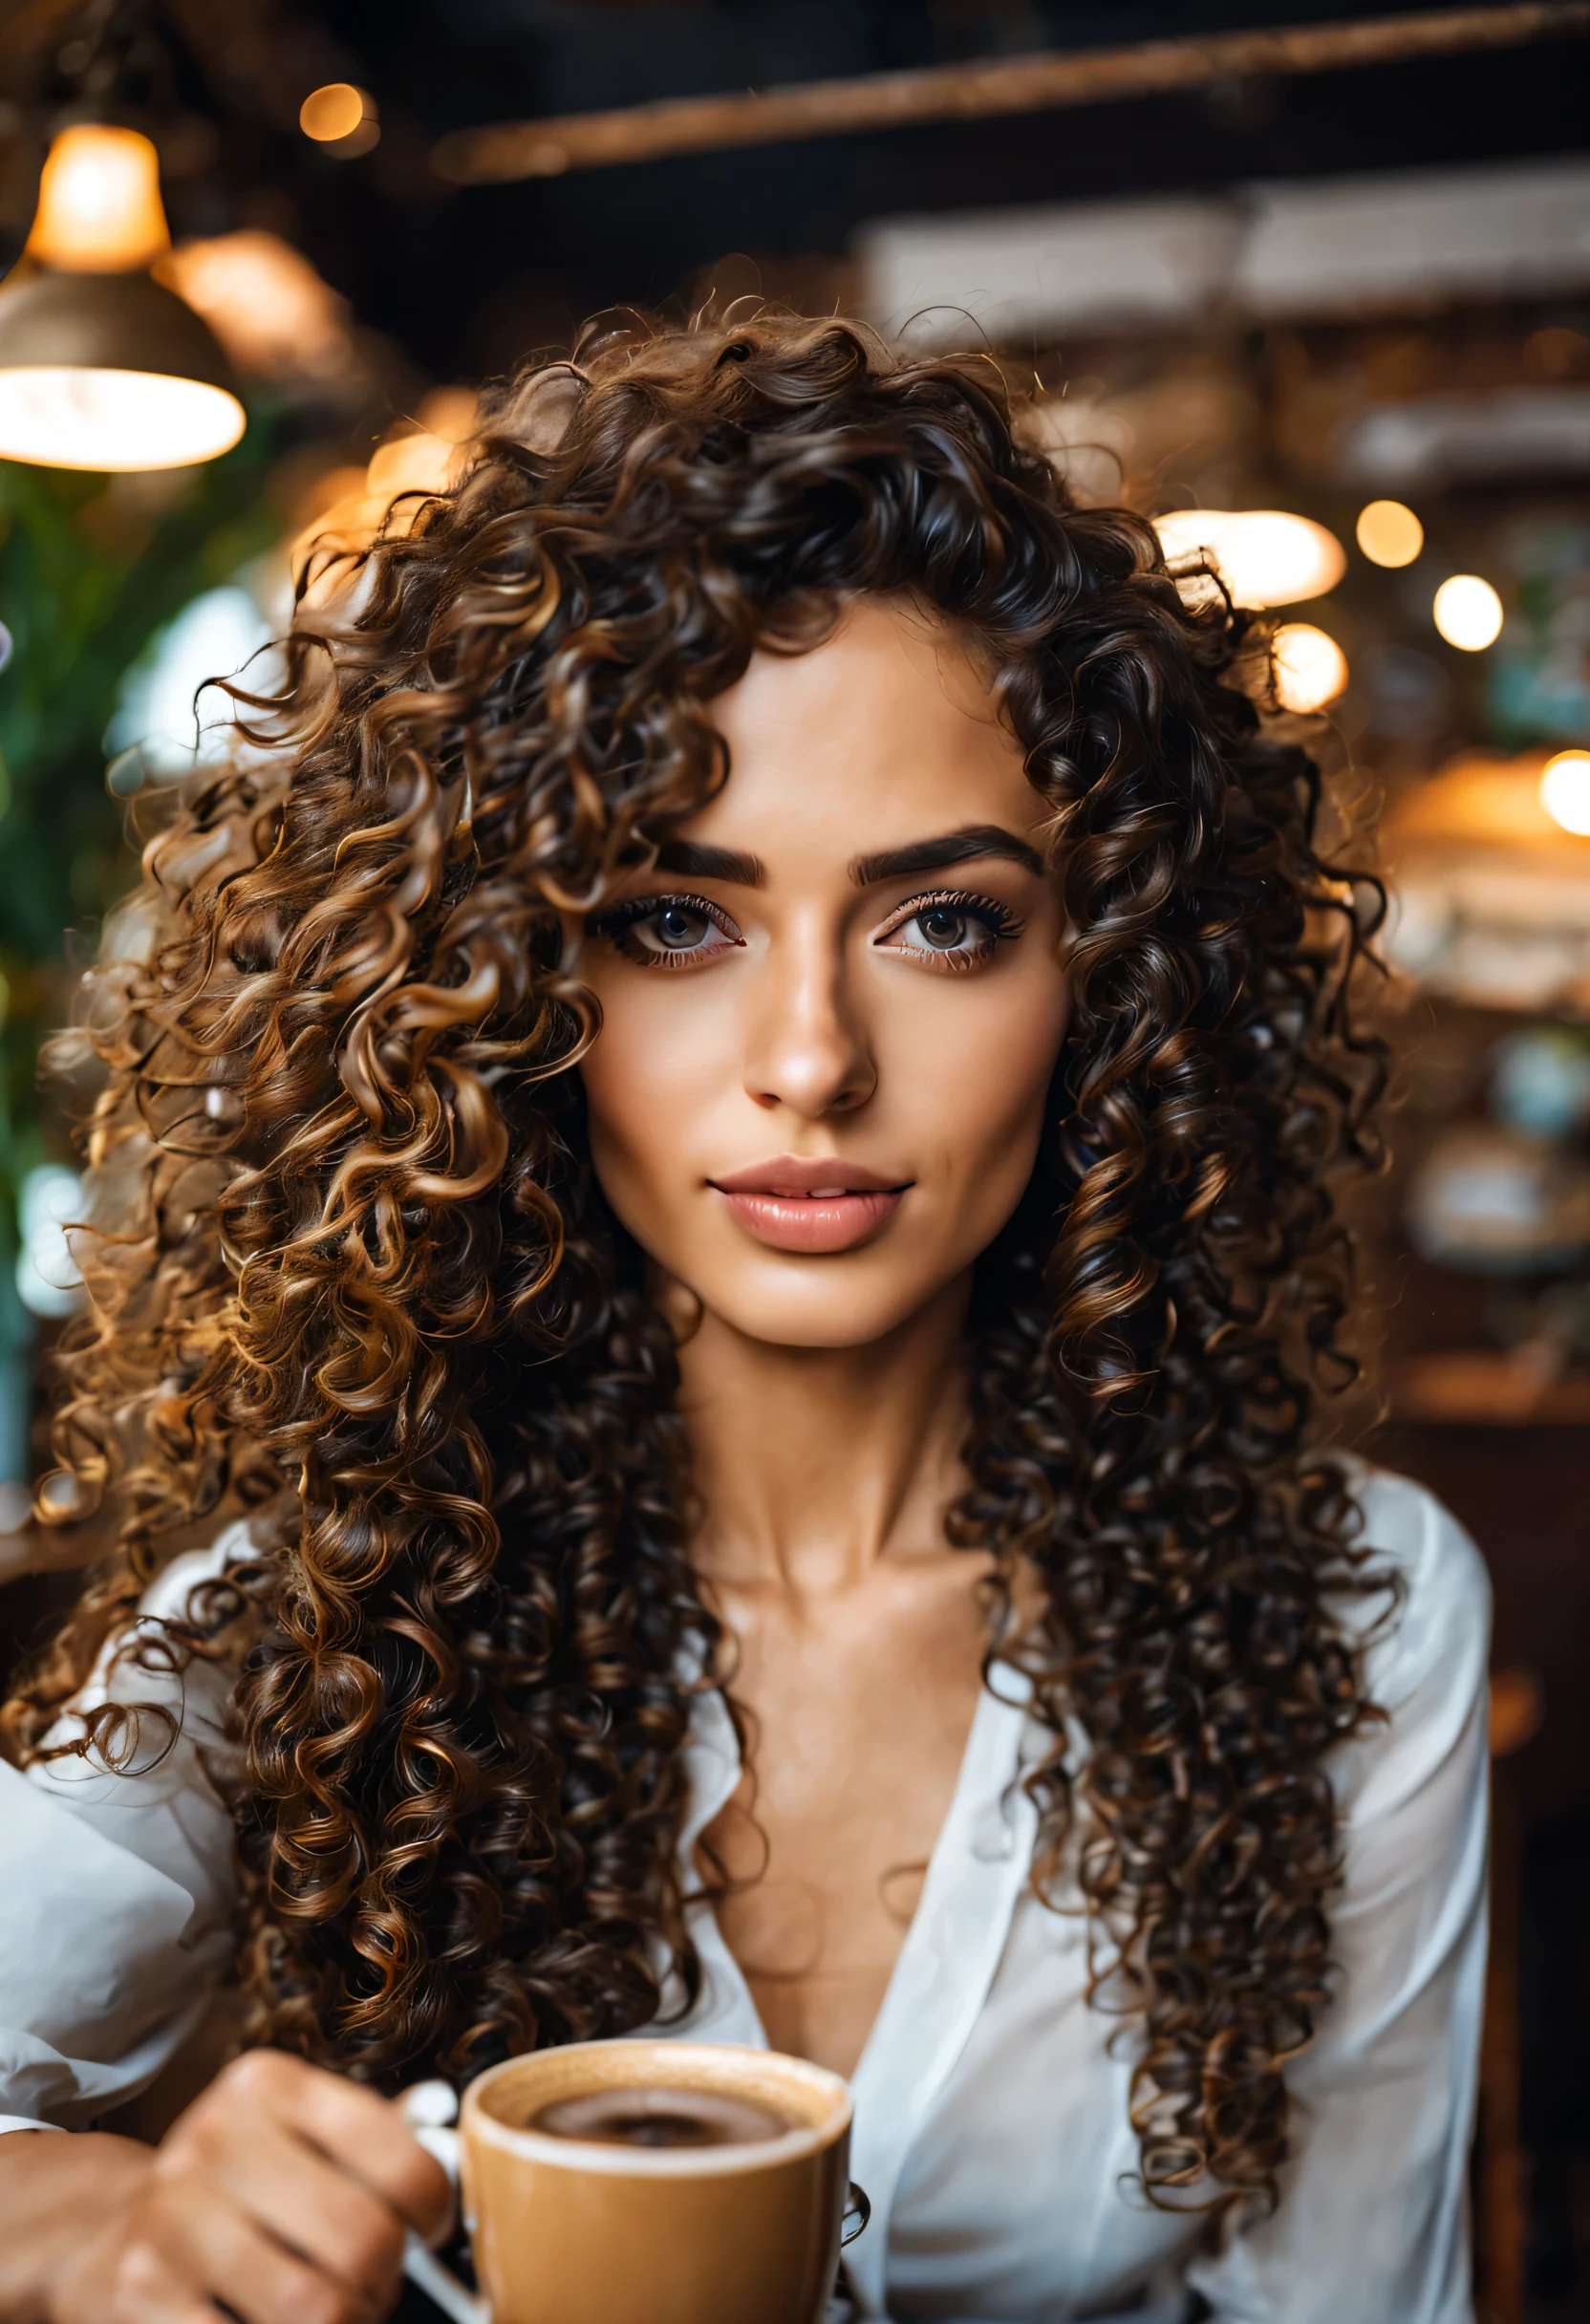 "Imagine Isabella Oliveira, 25 years old. Her long curly hair dances softly, wearing a relaxed and formal ensemble that highlights the natural beauty of Brazil. (Isabella is making a cute selfie in a coffee shop). Capture the serenity in her eyes.